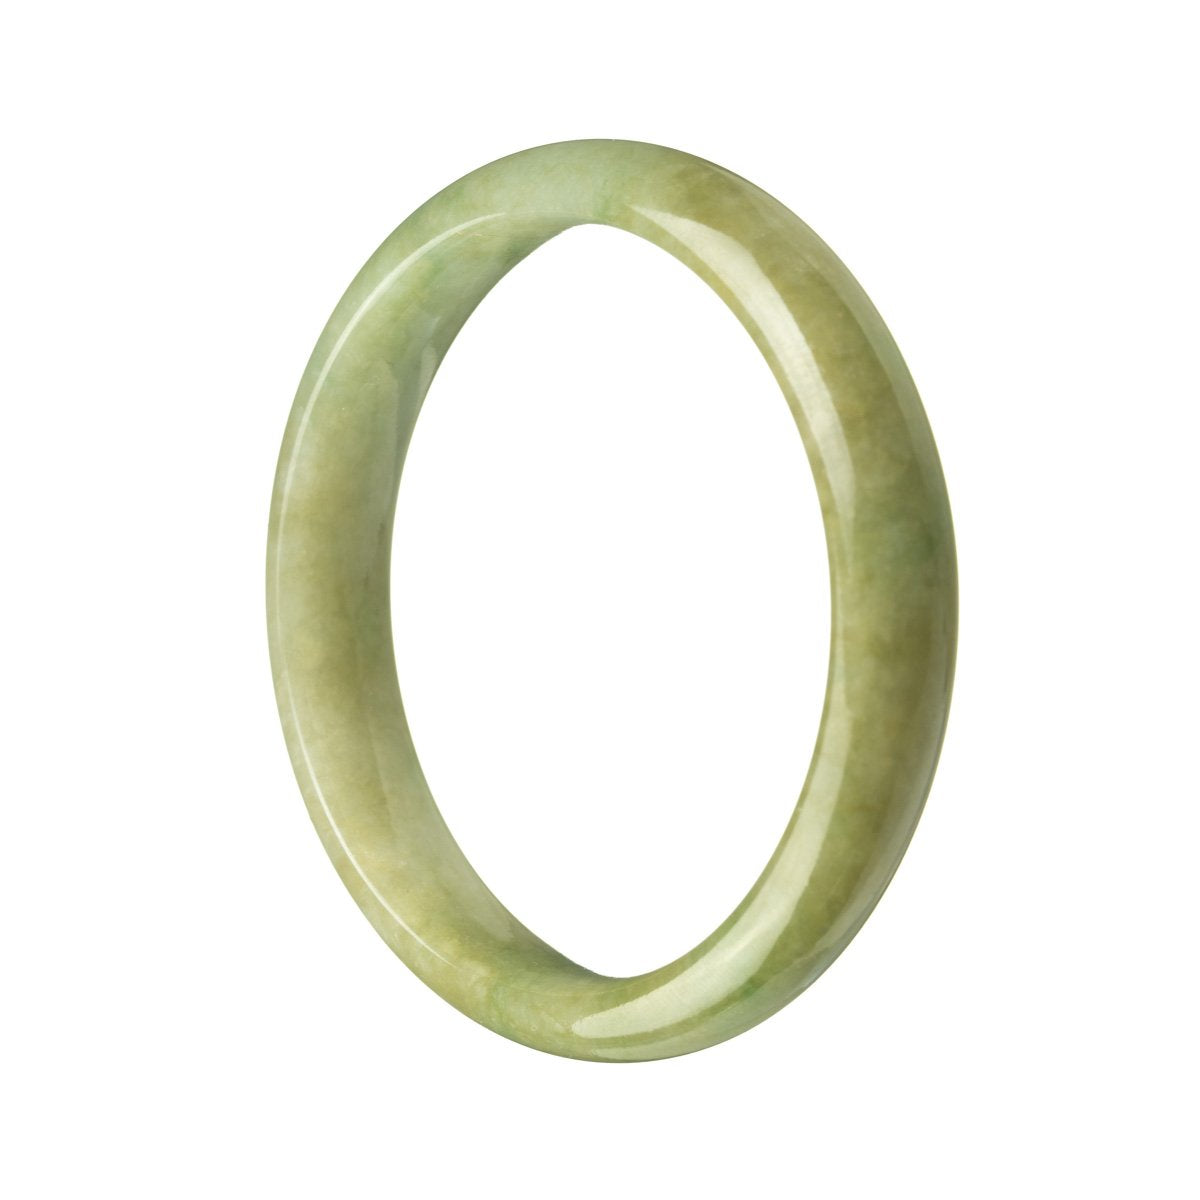 A close-up photo of a green bangle bracelet made of genuine untreated Burma Jade. The bracelet has a half-moon shape and measures 59mm in diameter. It is a beautiful piece of jewelry from the MAYS™ collection.